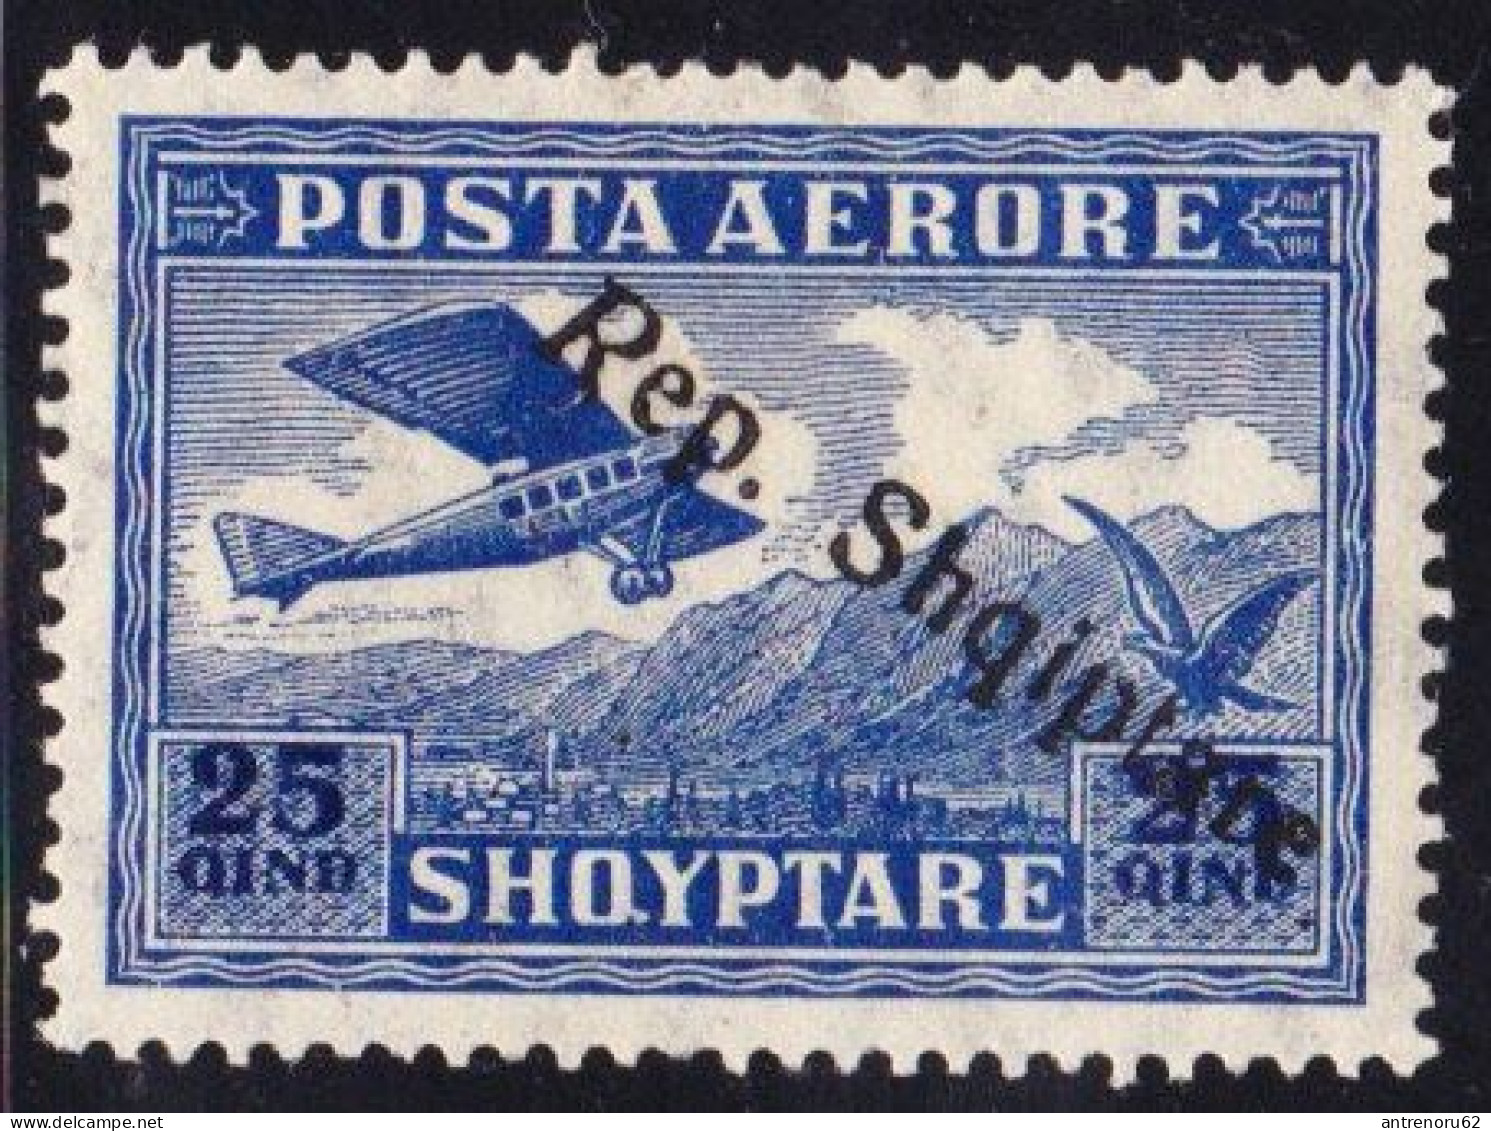 STAMPS-ALBANIA-1927-UNUSED-MH*-SEE-SCAN - Albanien